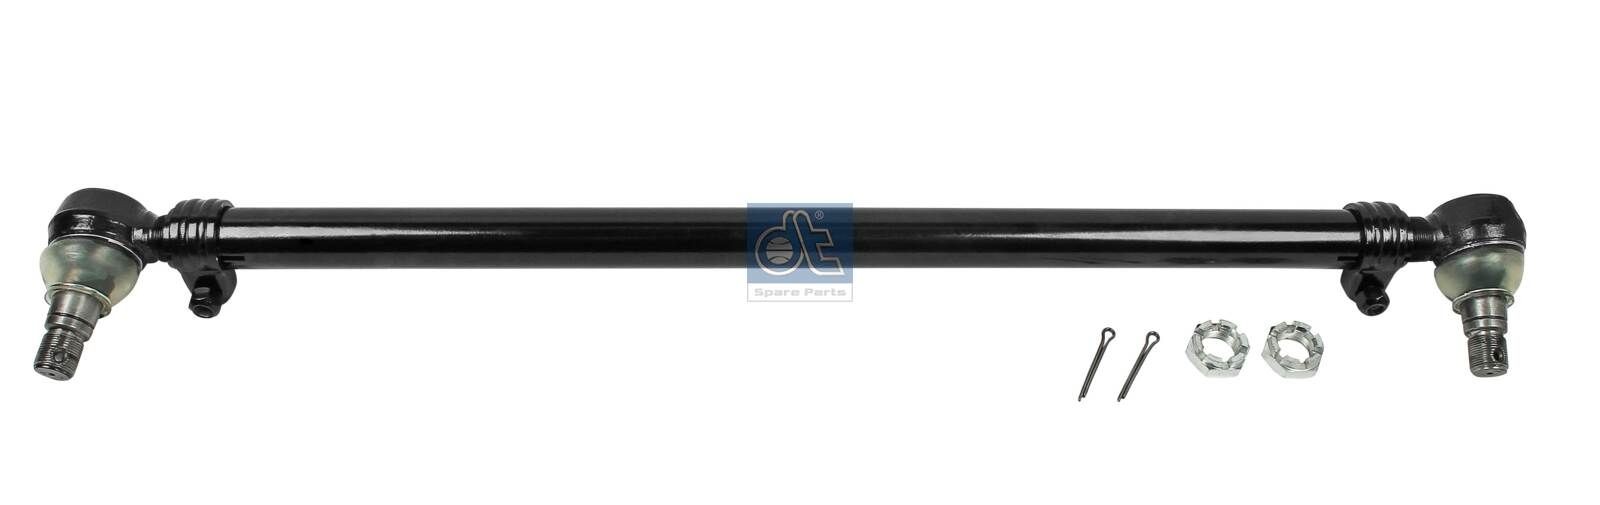 Ford FOCUS Tie rod axle joint 7337361 DT Spare Parts 4.65664 online buy